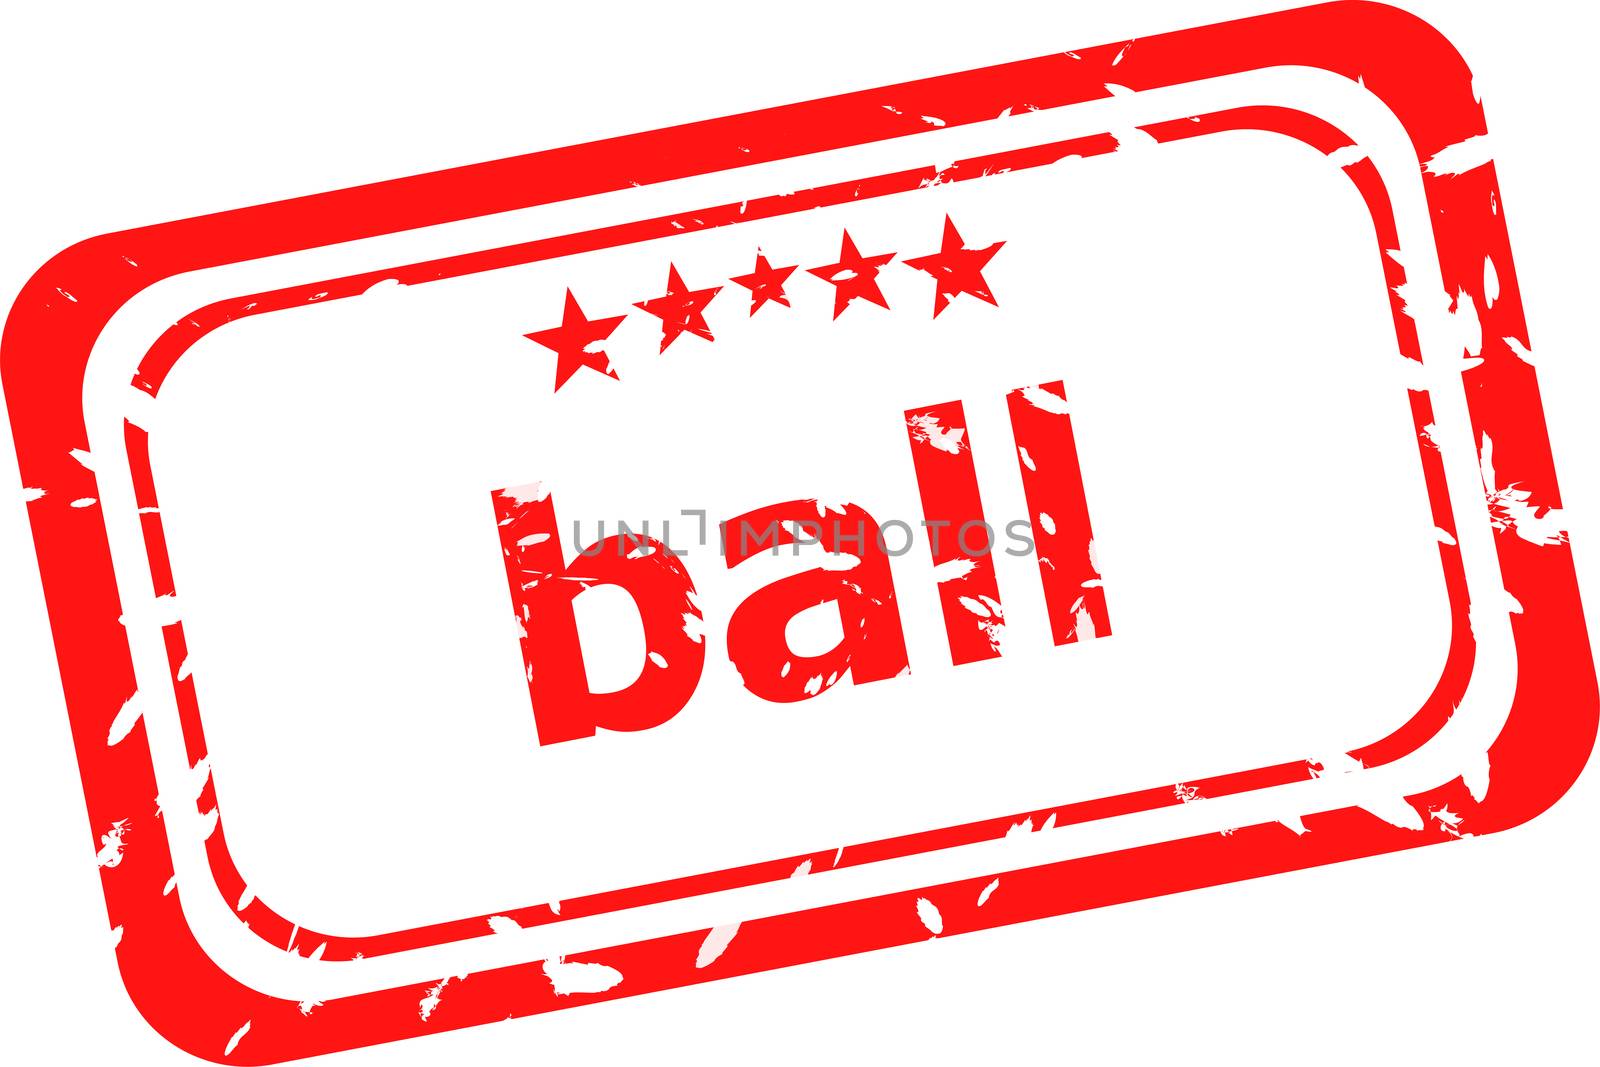 ball word on red rubber grunge stamp